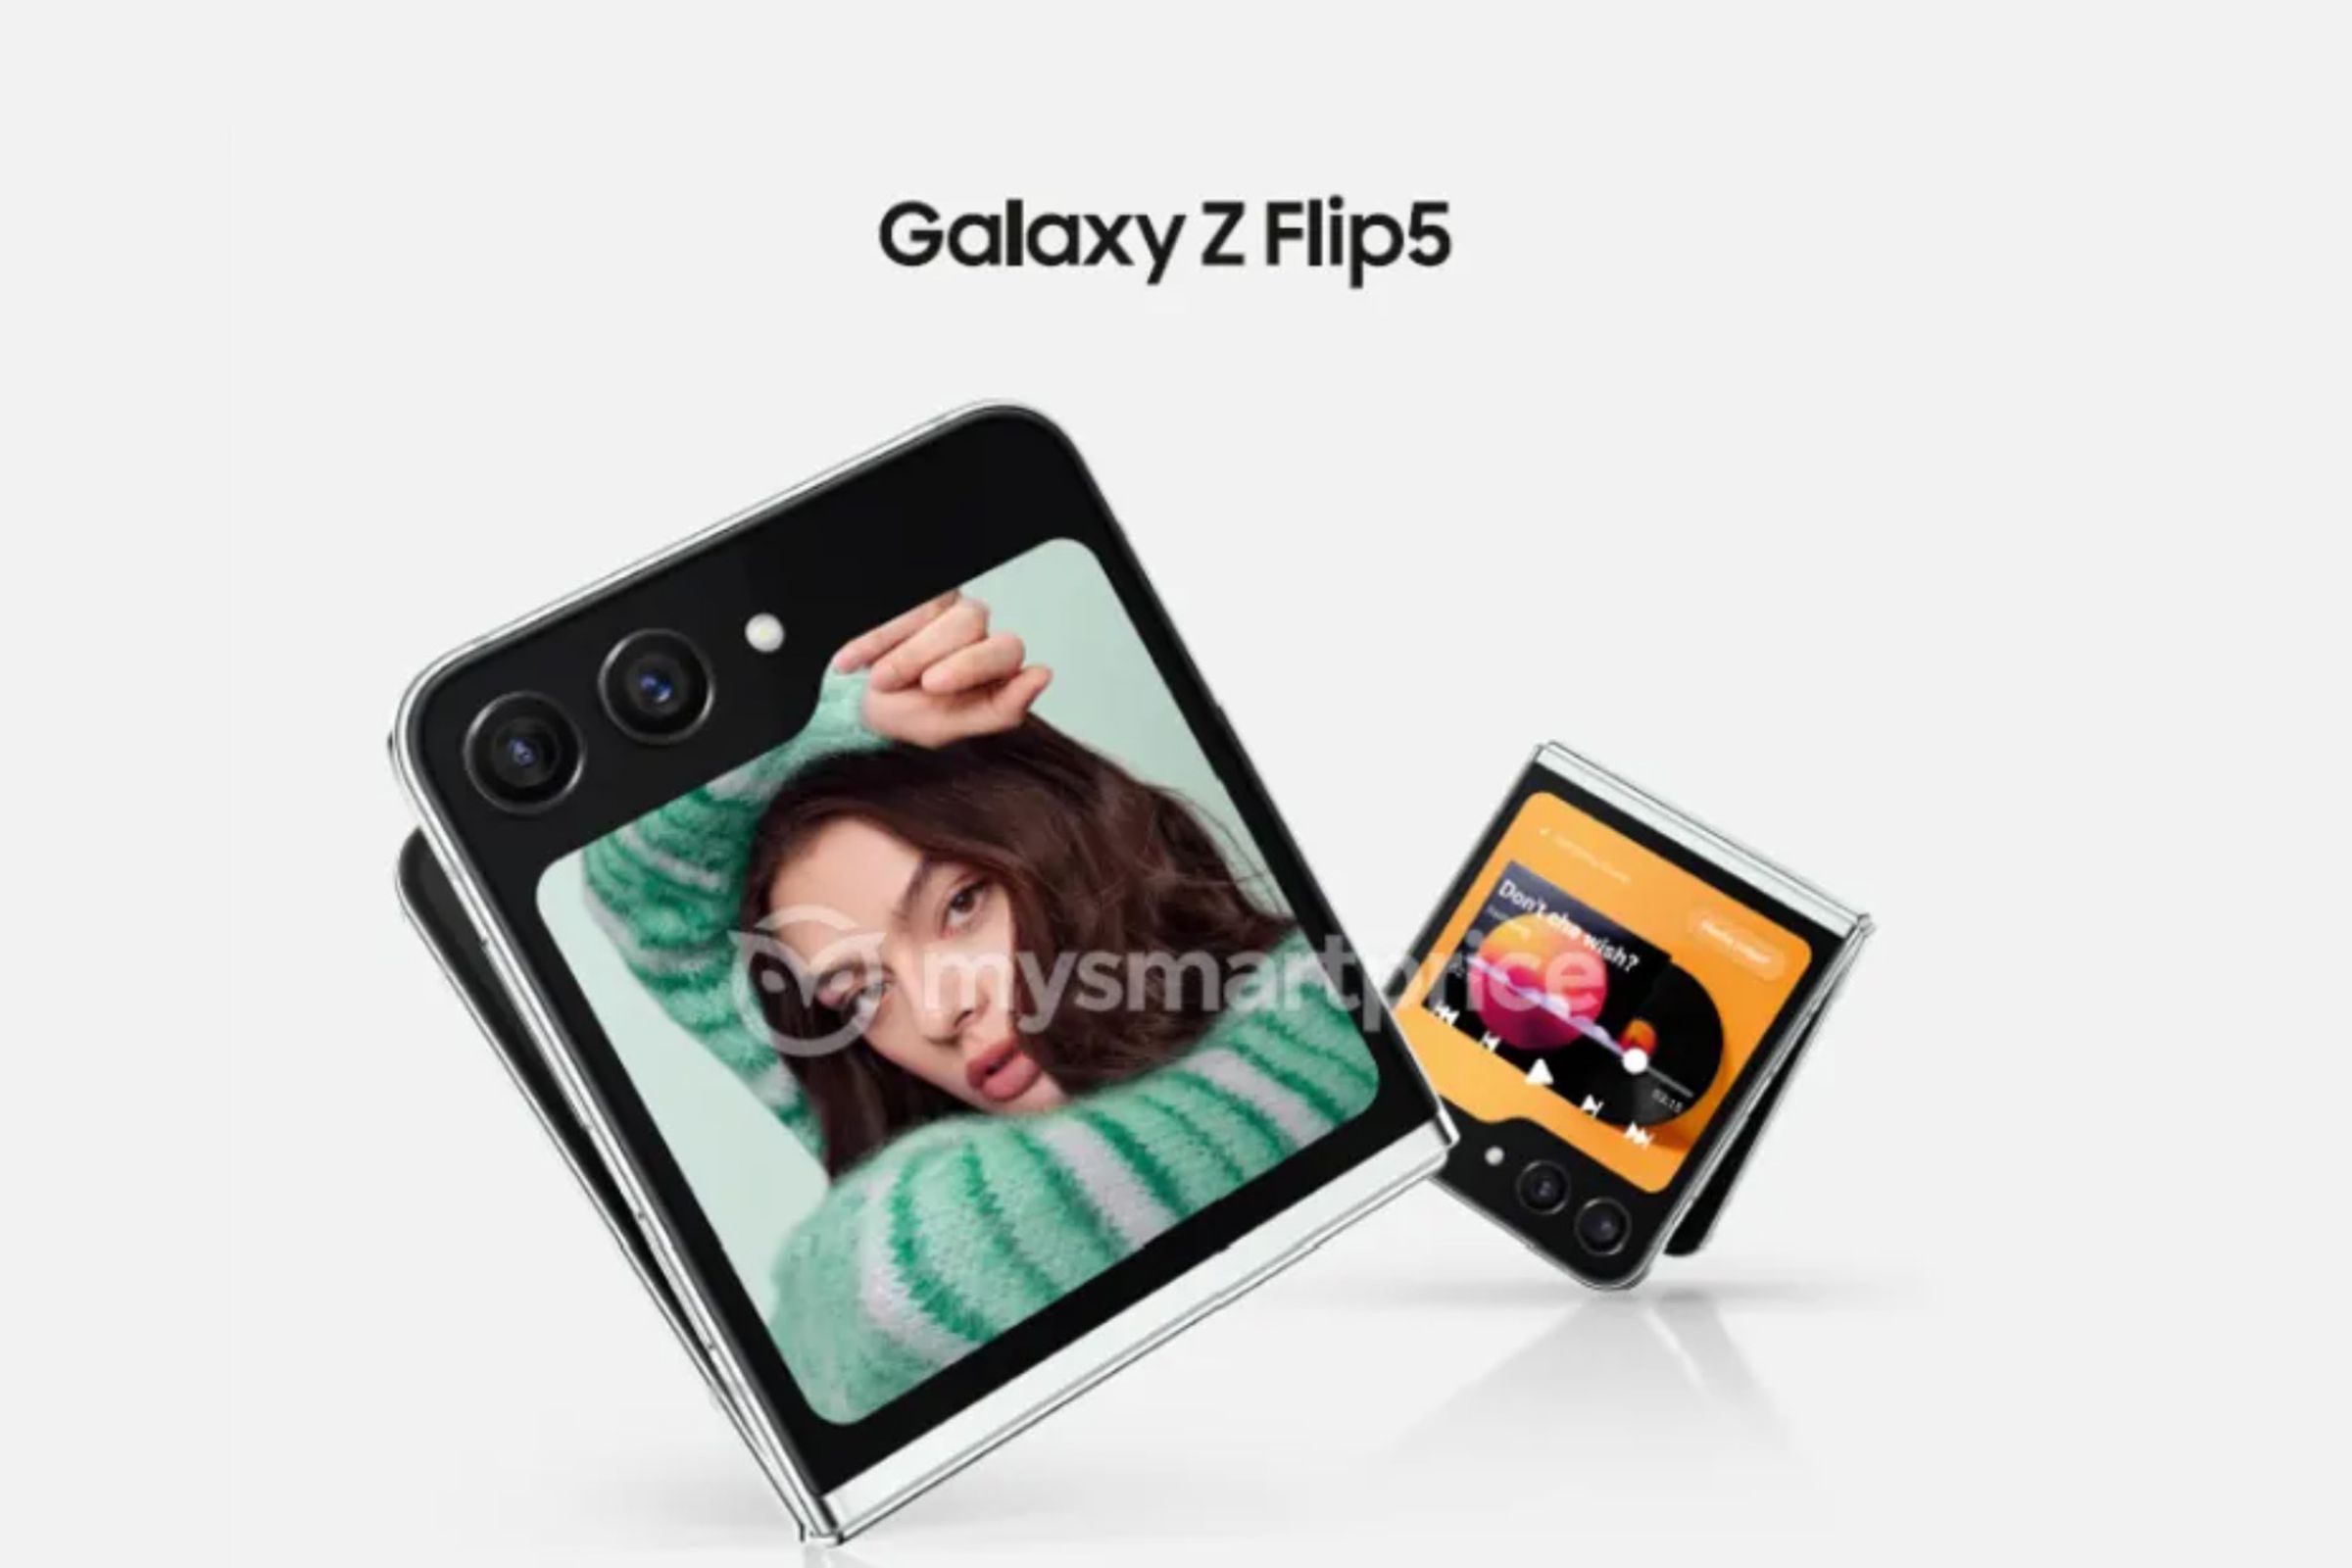 Render of Galaxy Z Flip 5 showing large cover screen flowing around the cameras.